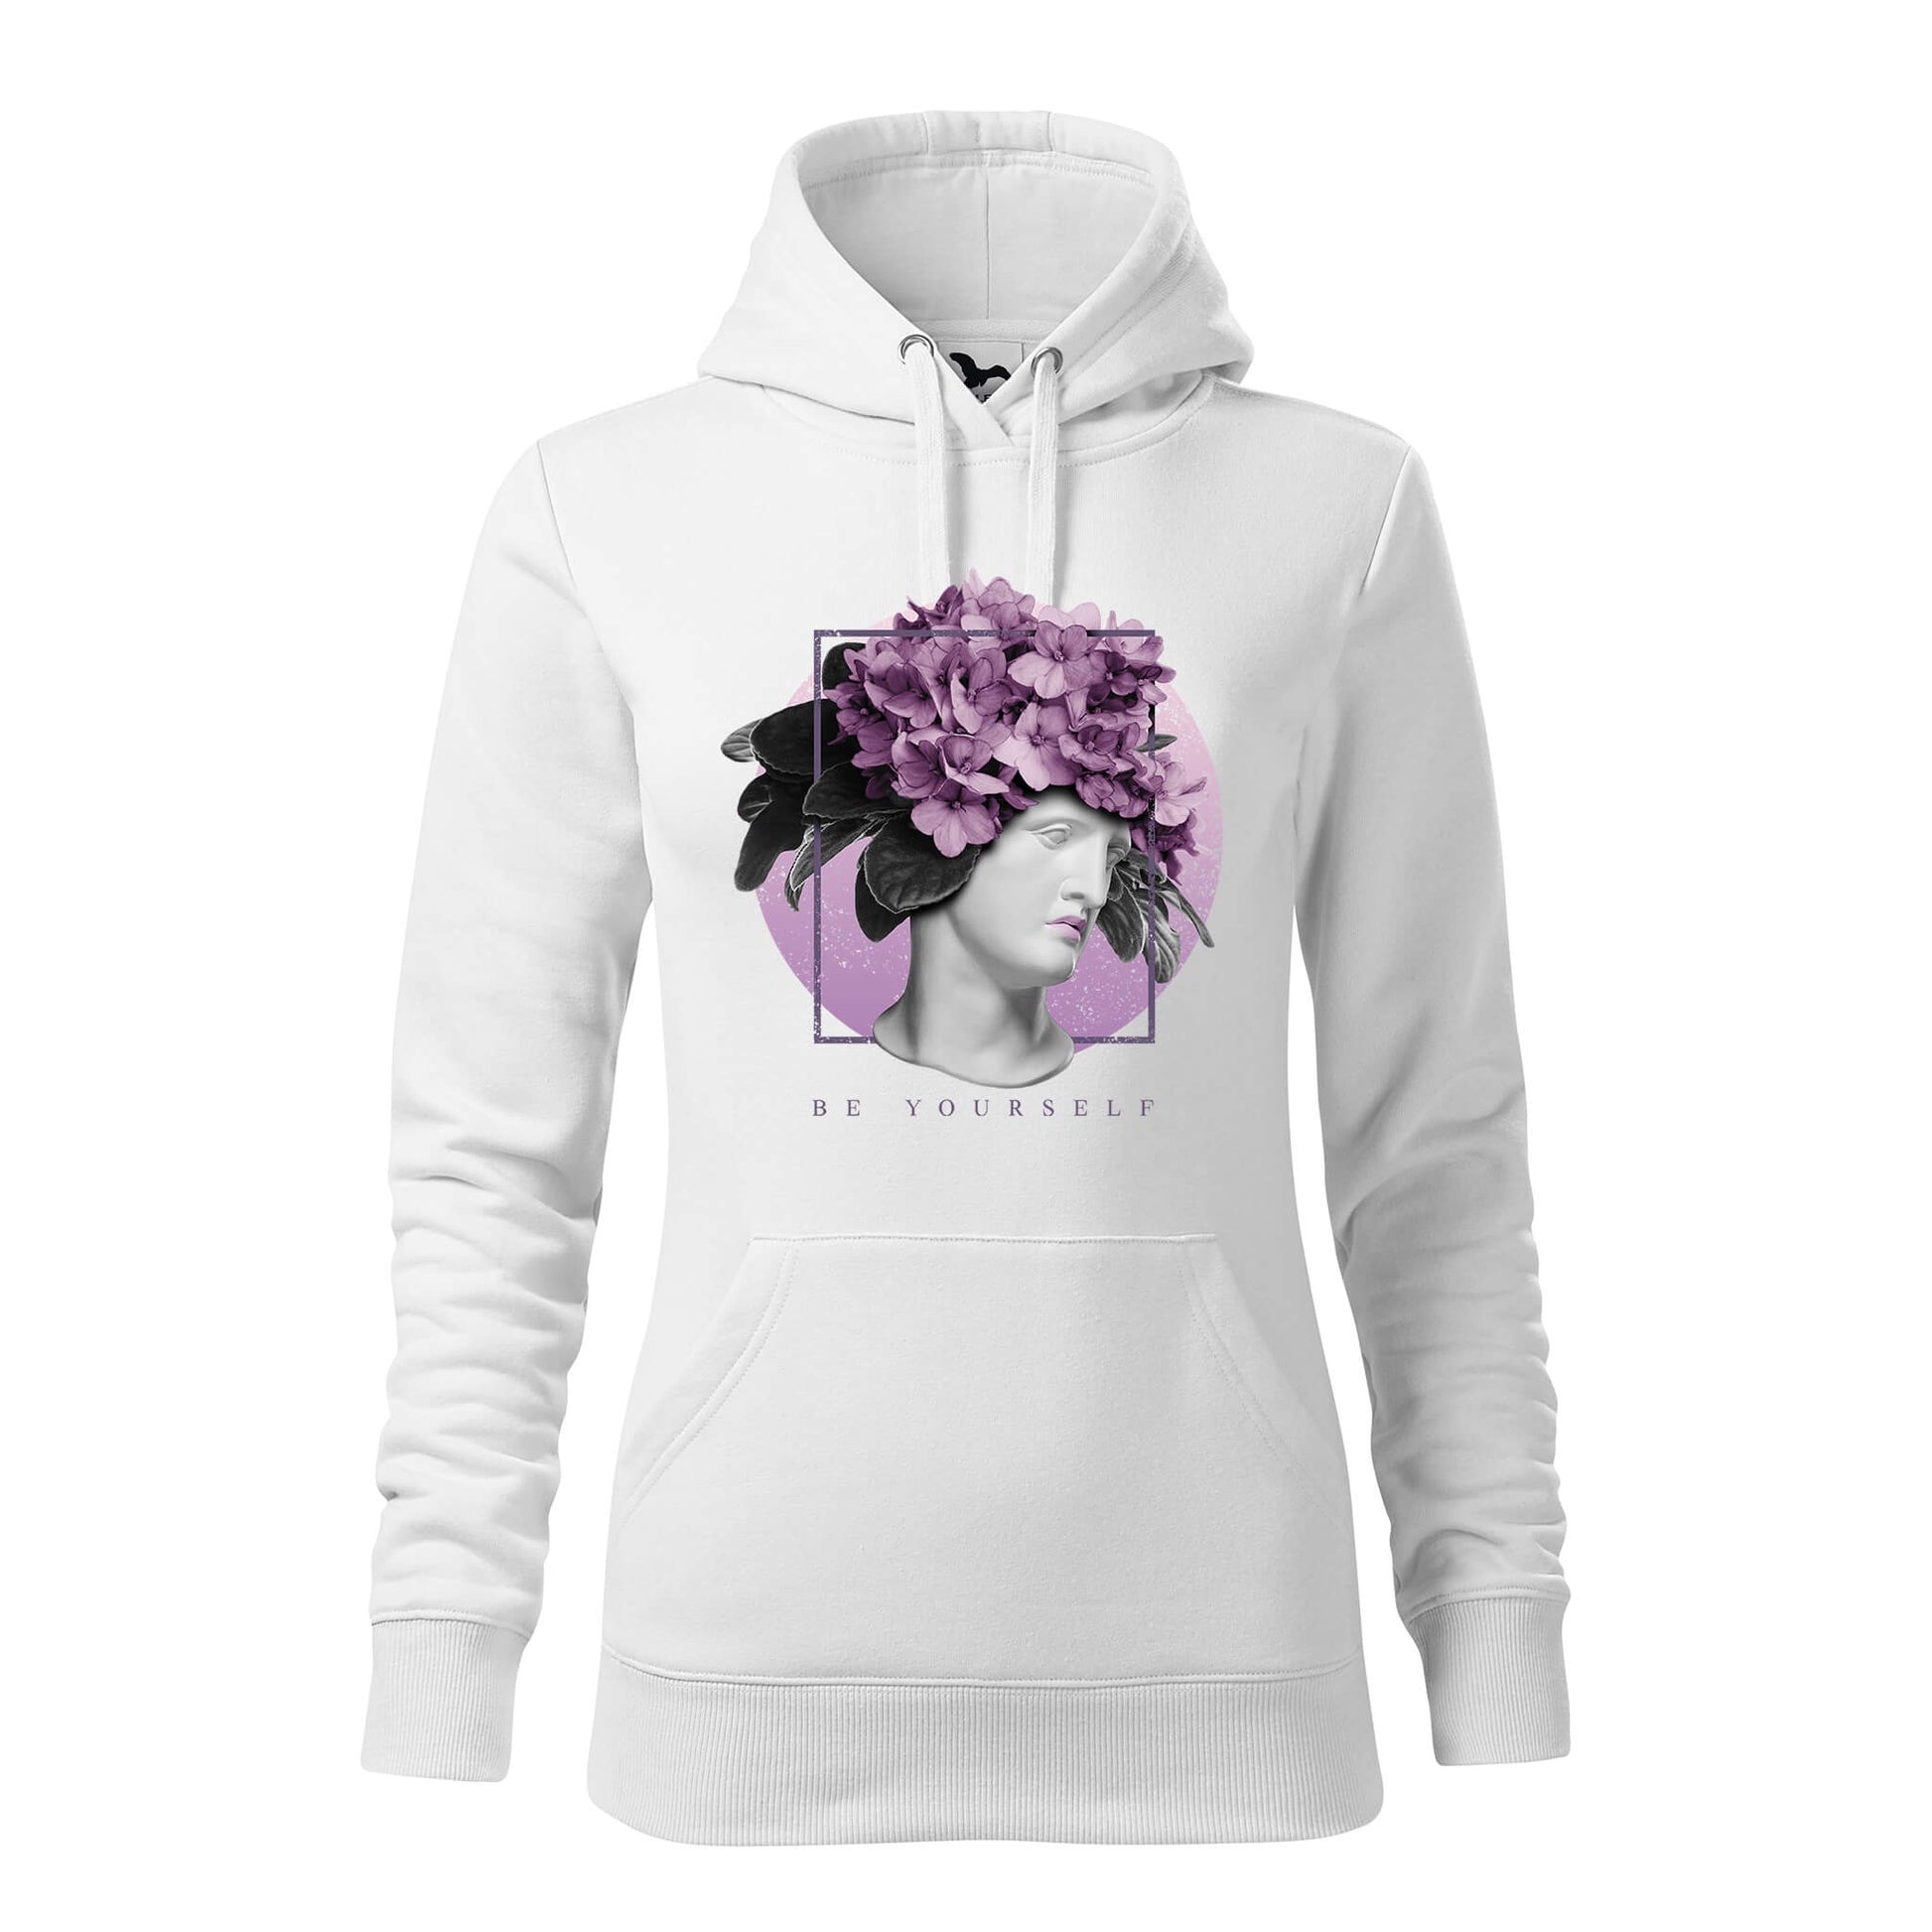 Be yourself hoodie - rvdesignprint